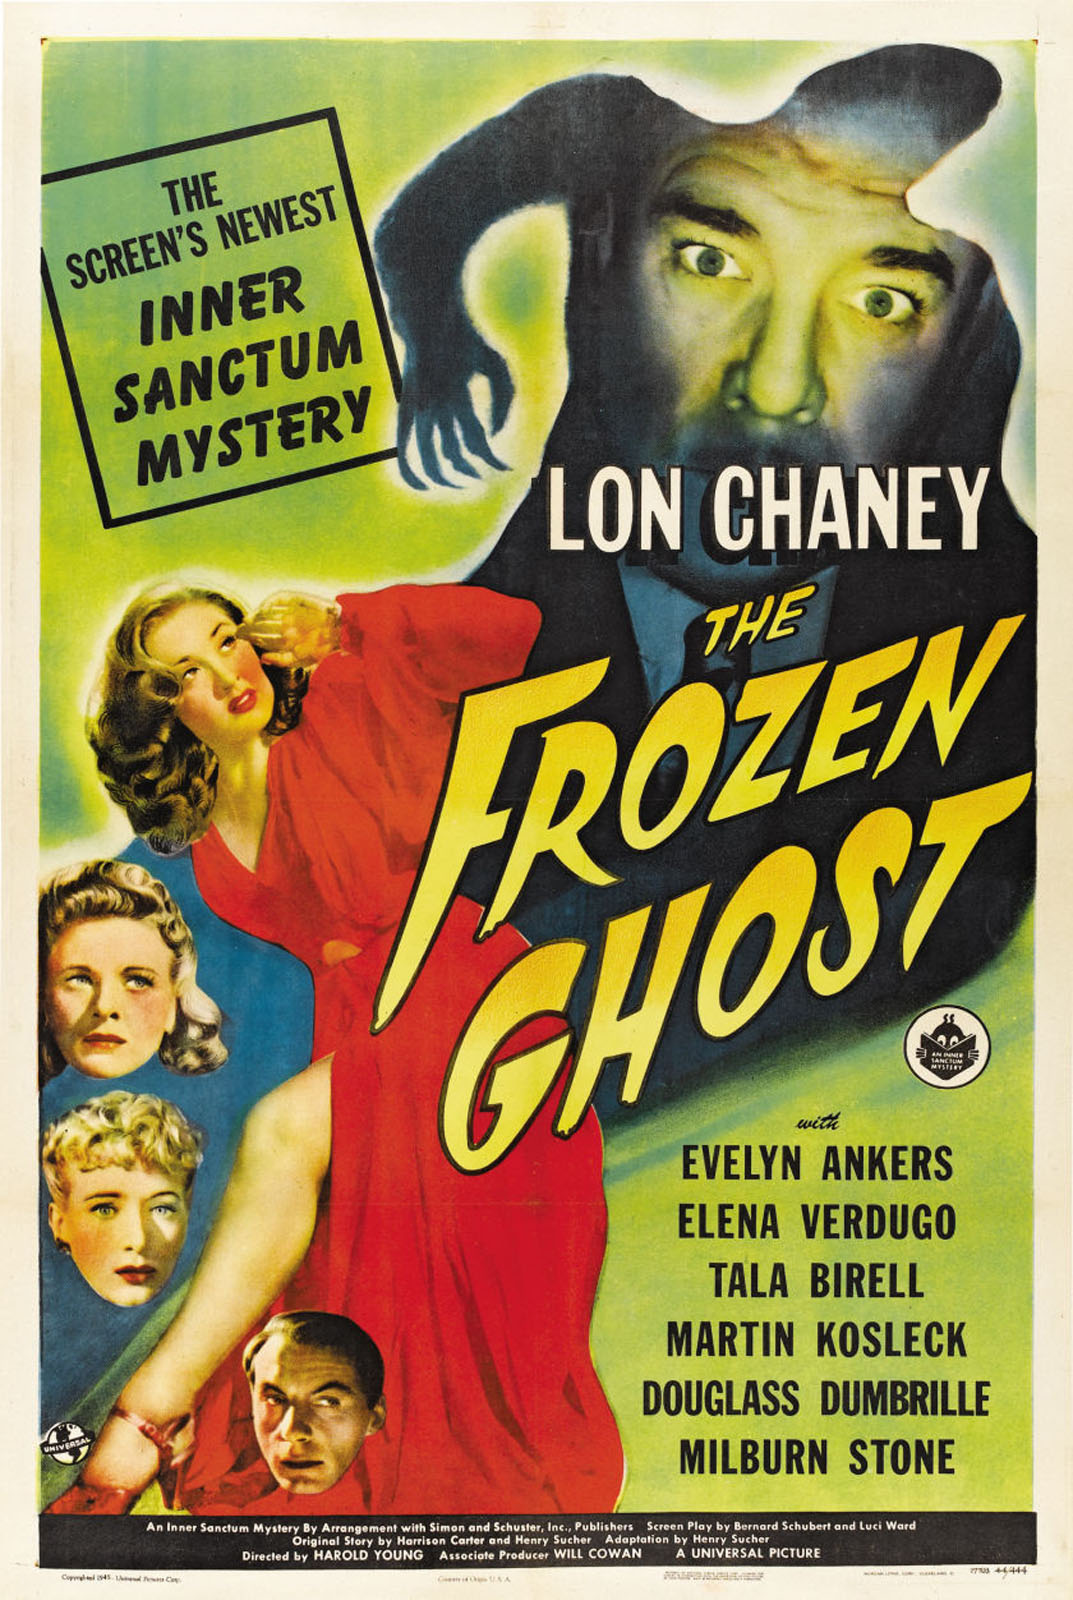 FROZEN GHOST, THE